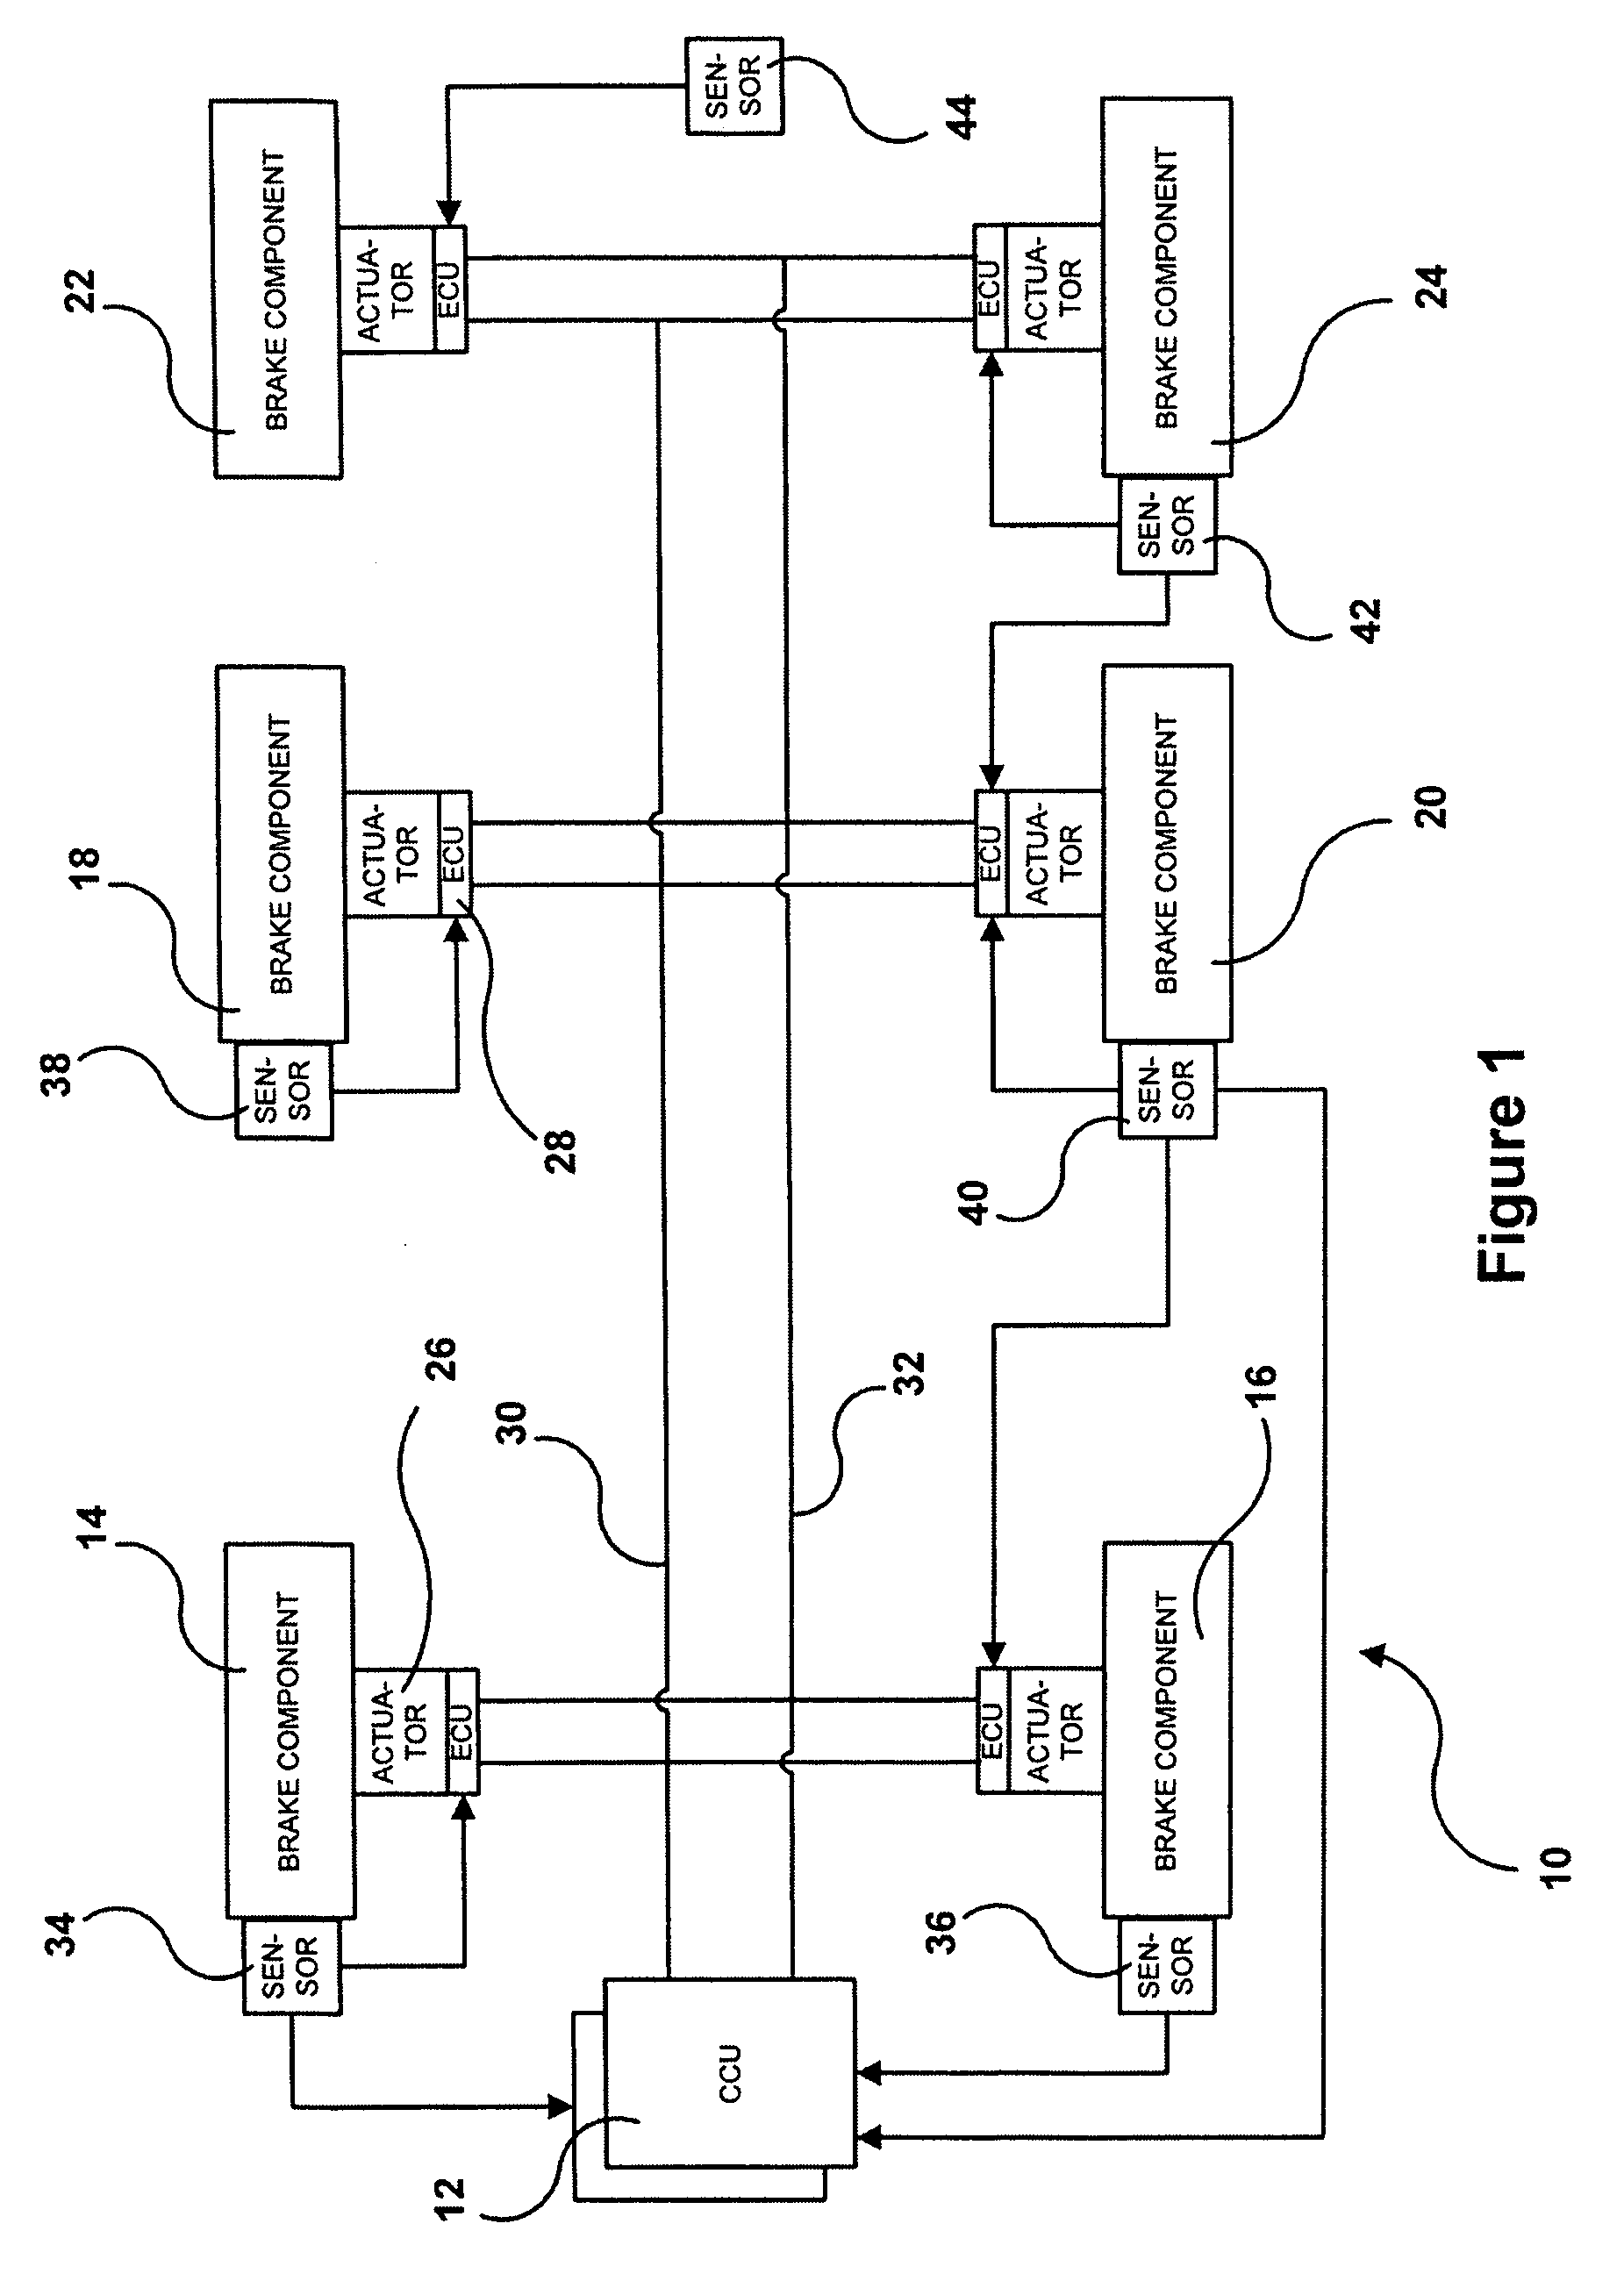 Brake system with distributed electronic control units incorporating failsafe mode